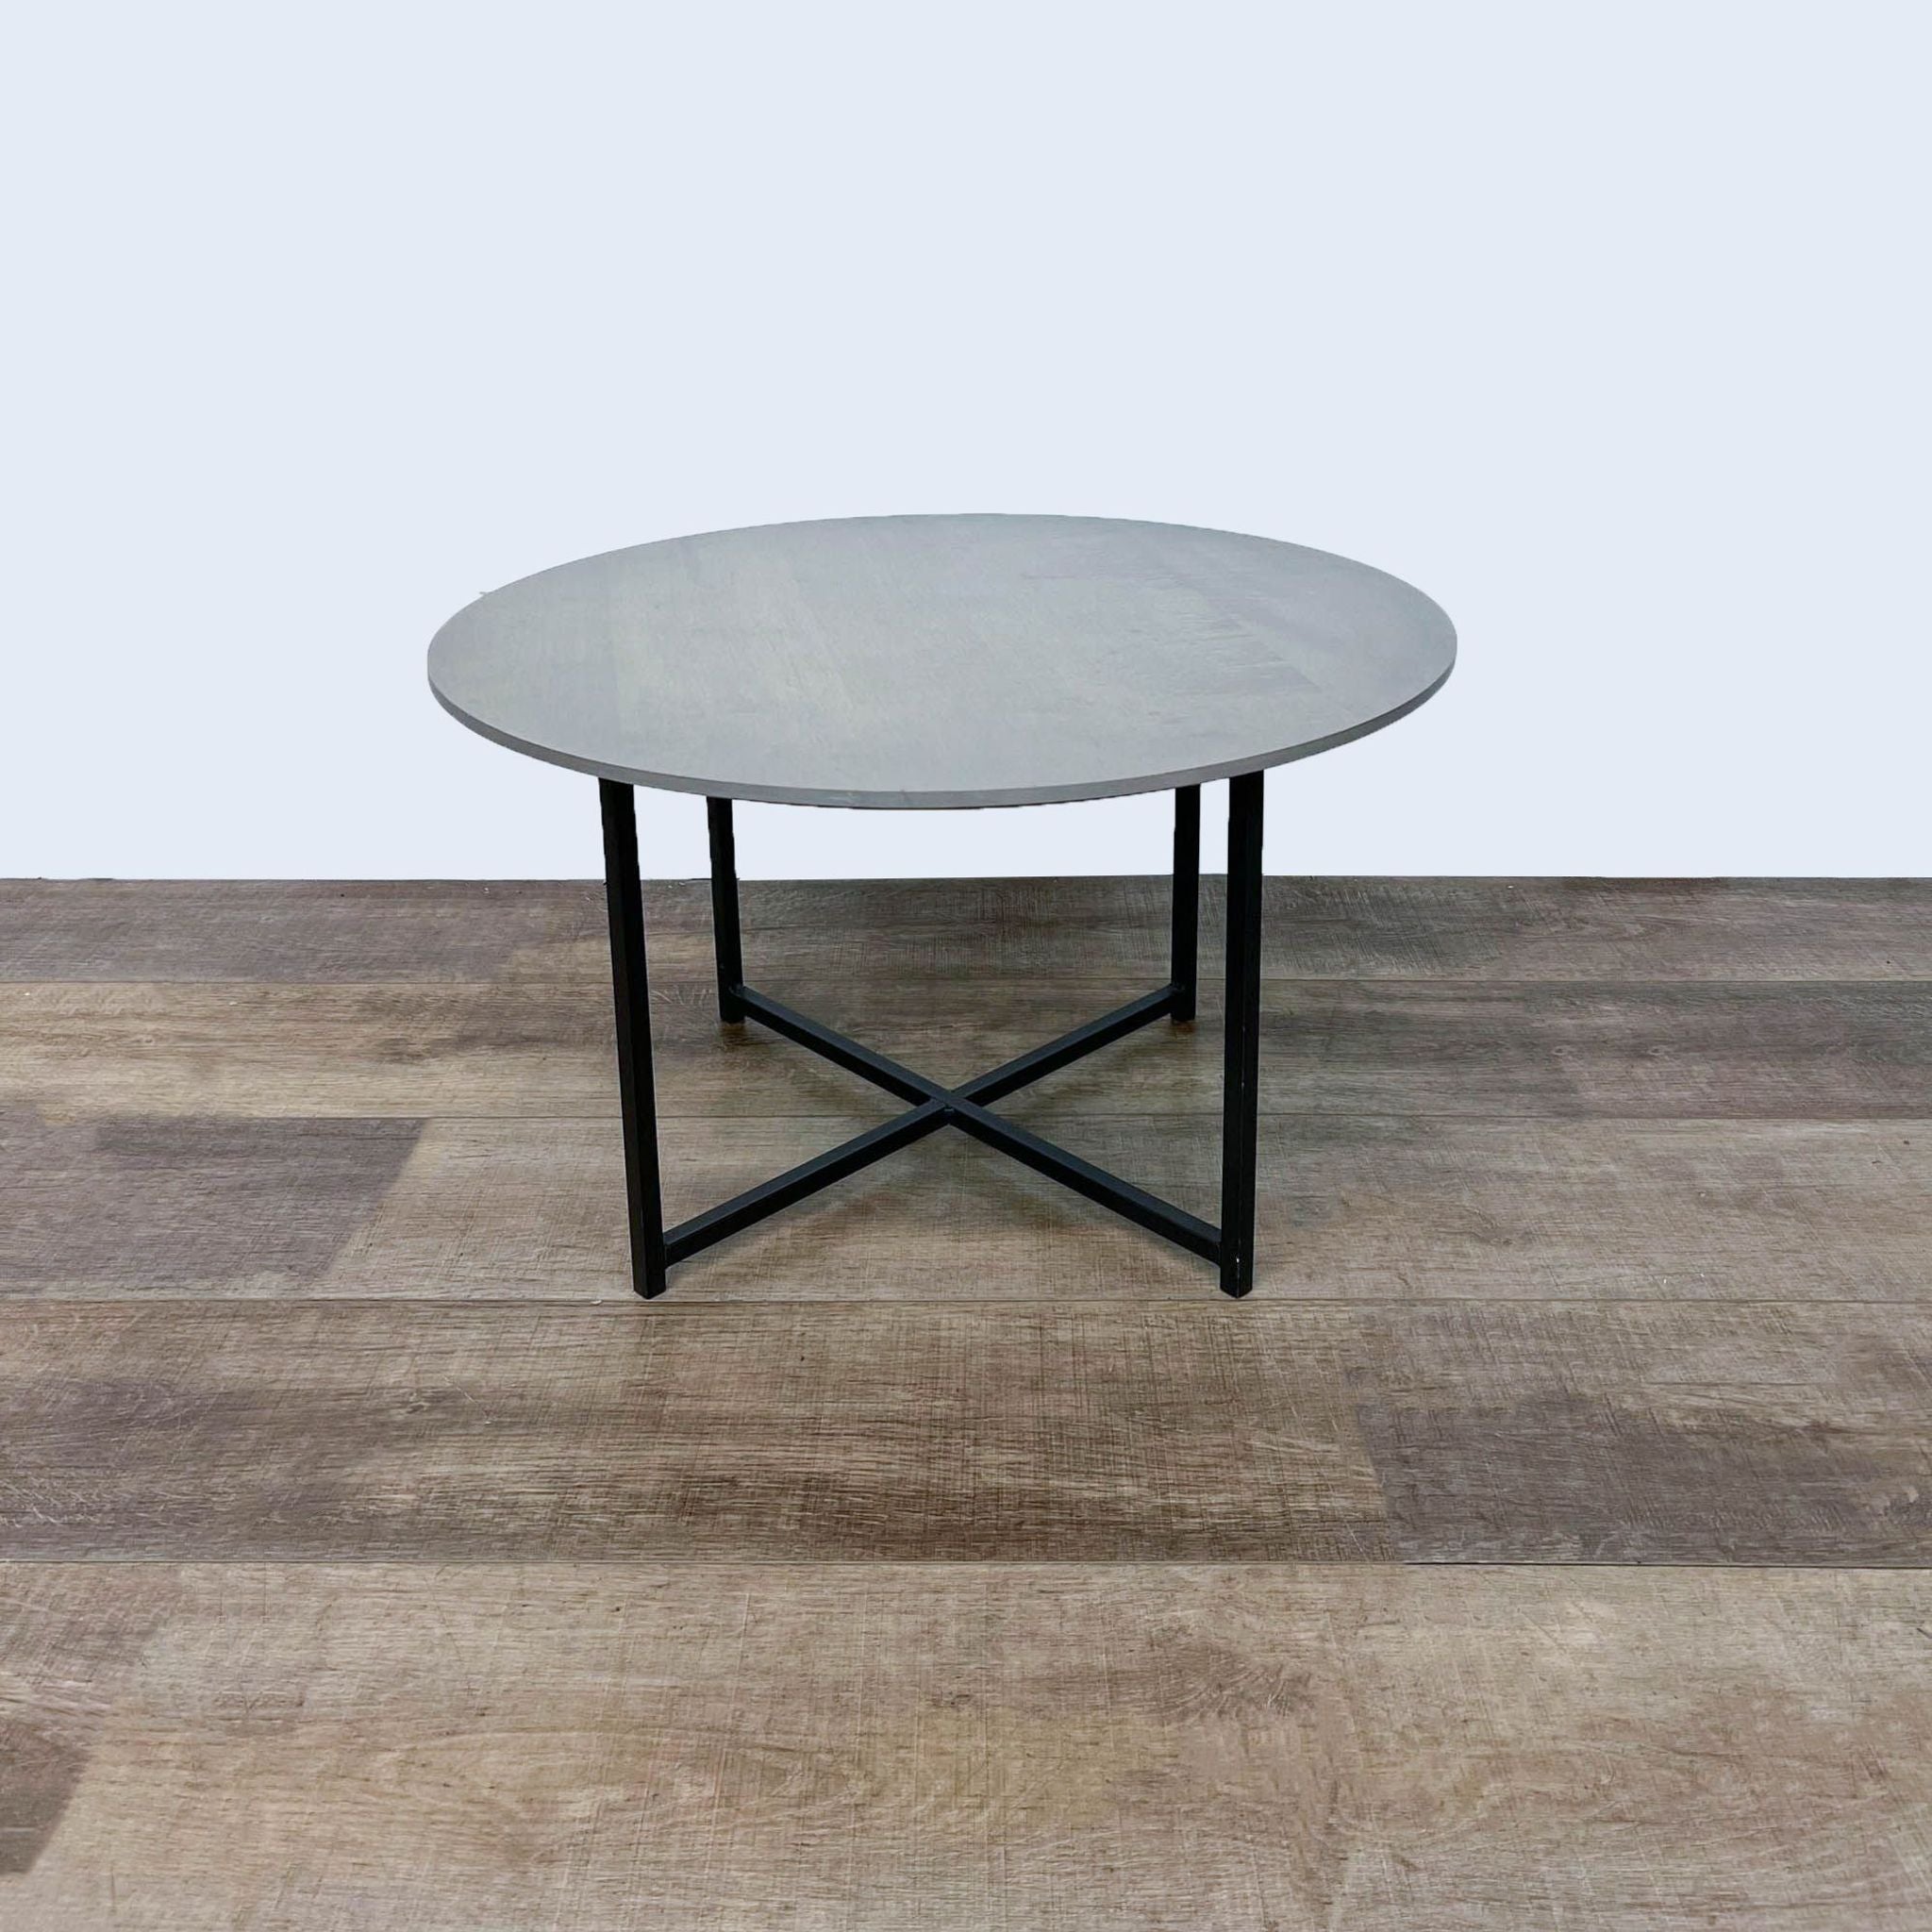 Room & Board coffee table featuring a circular shell-stained maple top and cross steel base, set against a wooden floor backdrop.